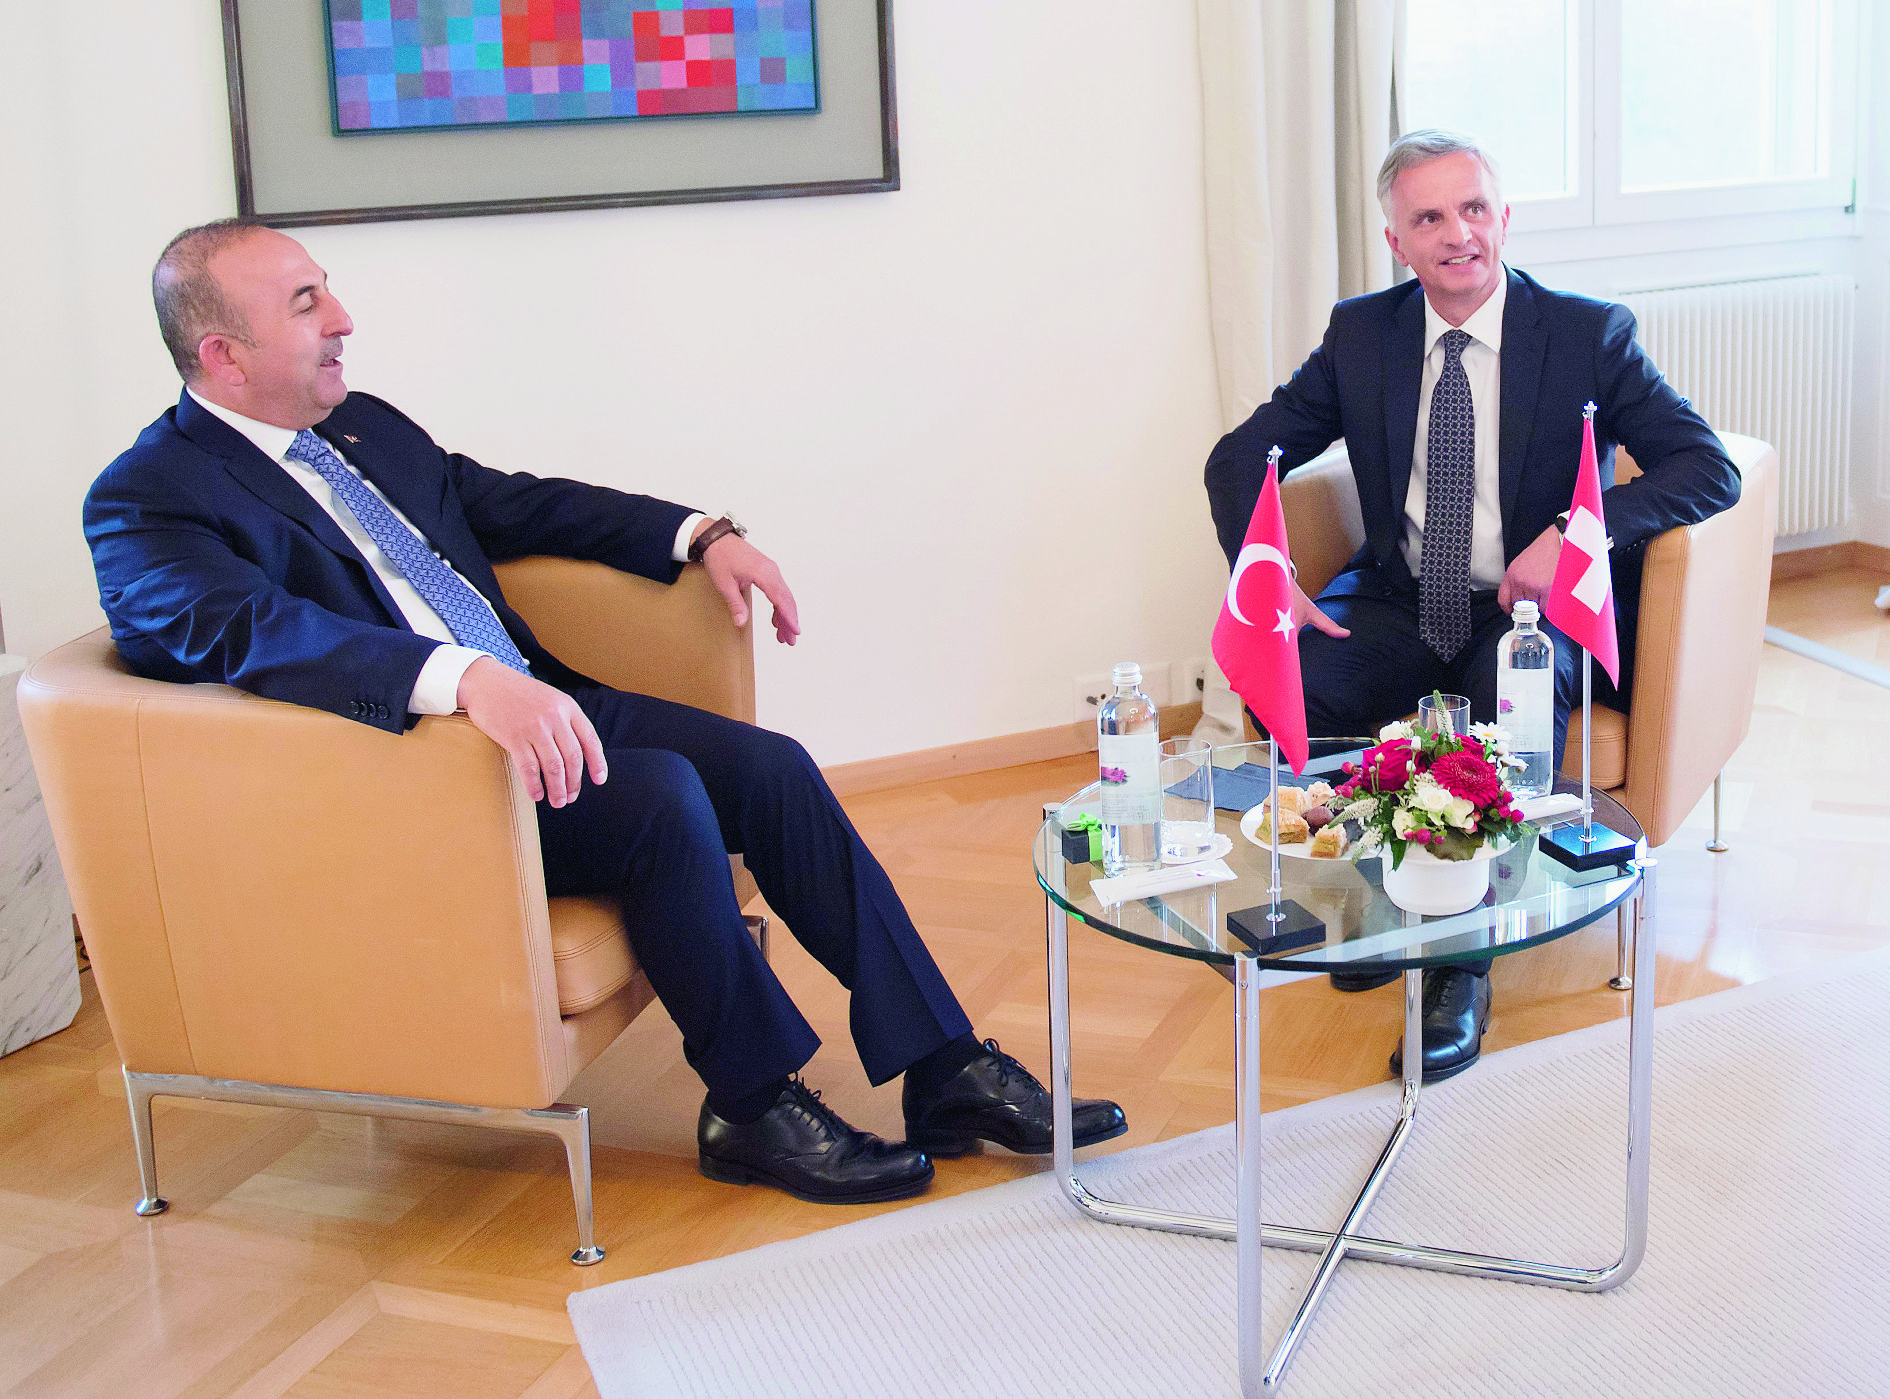 Turkish Foreign Minister Mevlut Cavusoglu, left, and Swiss Federal Councillor Didier Burkhalter, right, talk, Thursday, 23 March 2017, in Bern, Switzerland. Cavusoglu's visit to Switzerland follows a weeks-long dispute between Turkey and several other European nations over campaigning by Turkish politicians. Cavusoglu will also meet representatives of the Turkish community in Switzerland at the Turkish embassy in Bern. (KEYSTONE/POOL/Anthony Anex) SCHWEIZ BESUCH AUSSENMINISTER TUERKEI